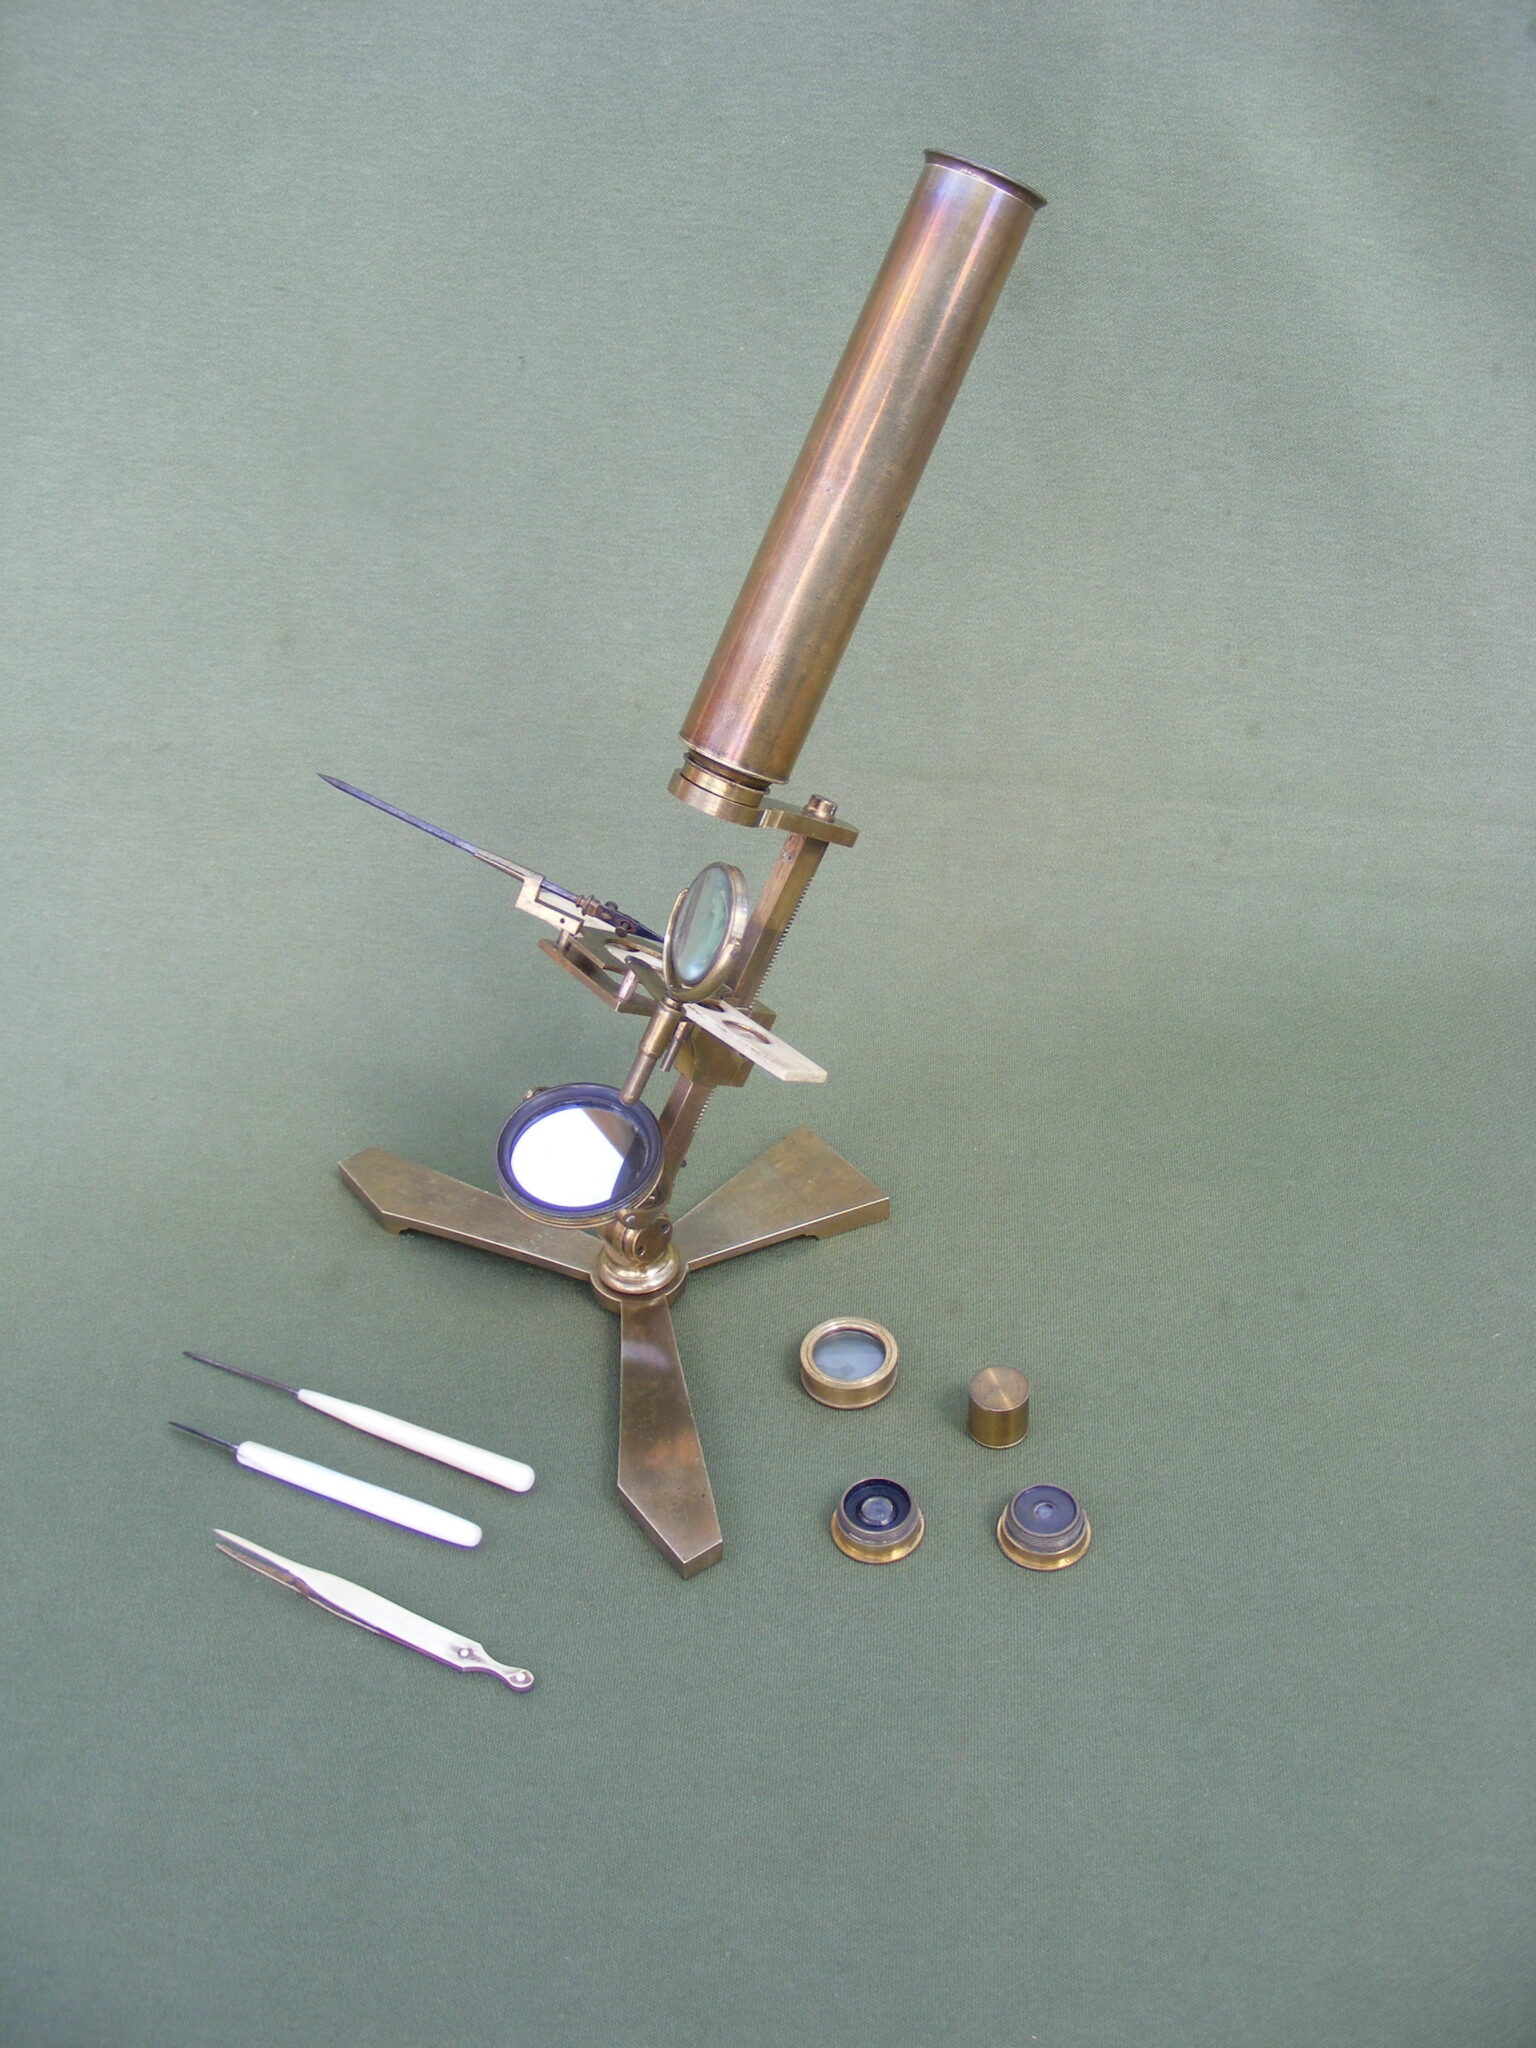 TRAVELING COMPOUND MICROSCOPE